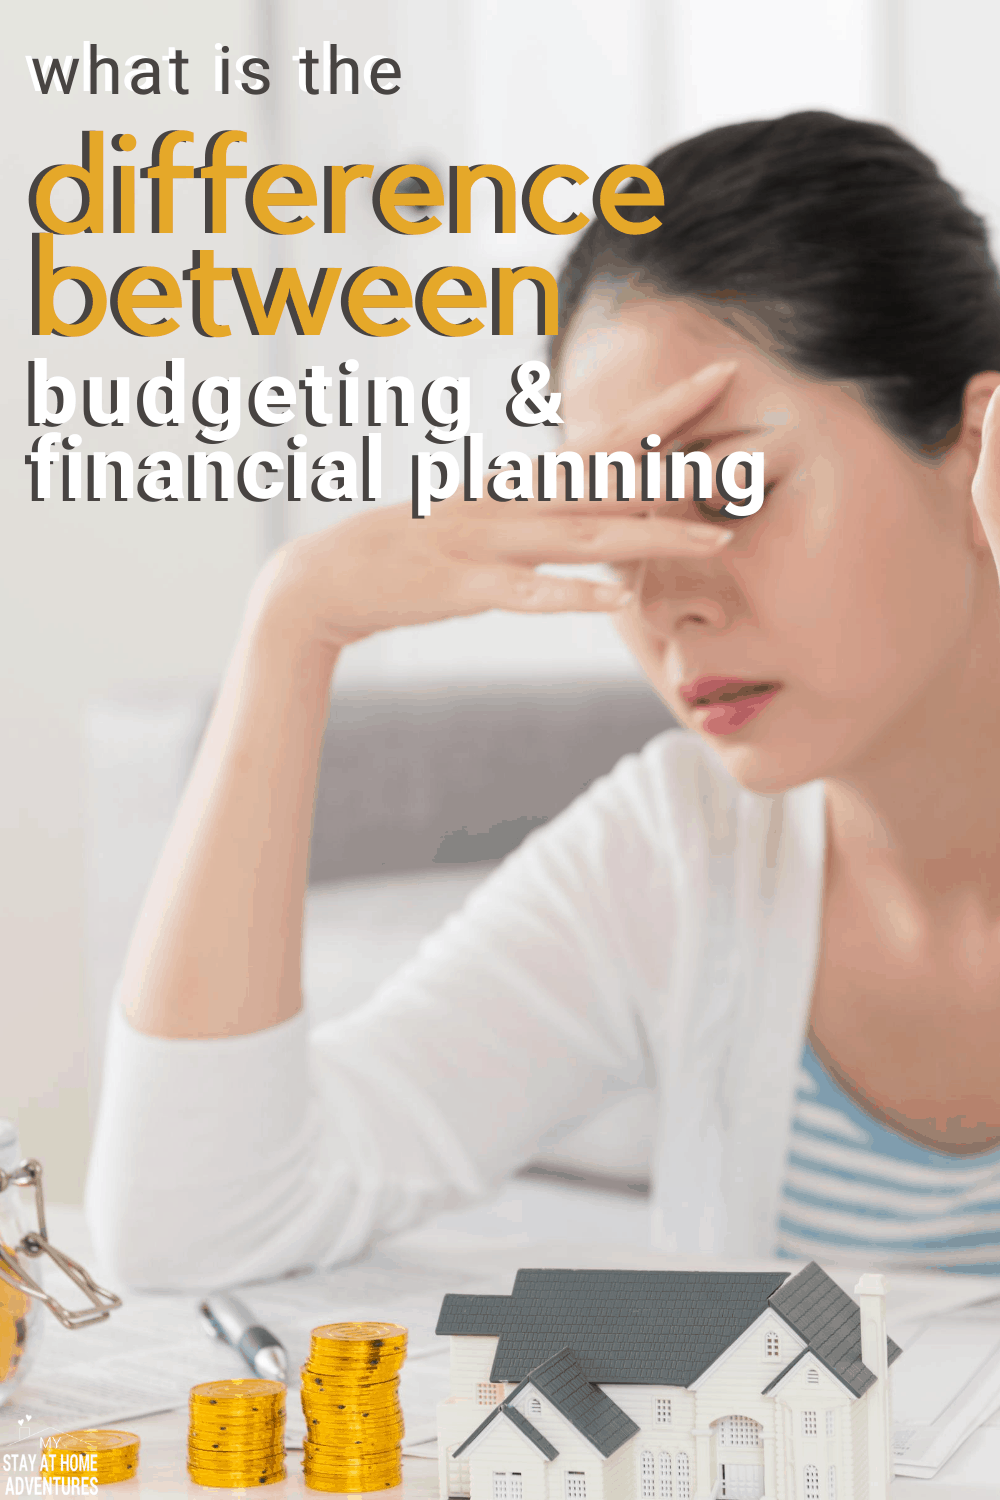 Budgeting and financial planning we hear about these terms but what makes them different and why are they important. #budgeting #beginningbudgeting #mommyfinances via @mystayathome